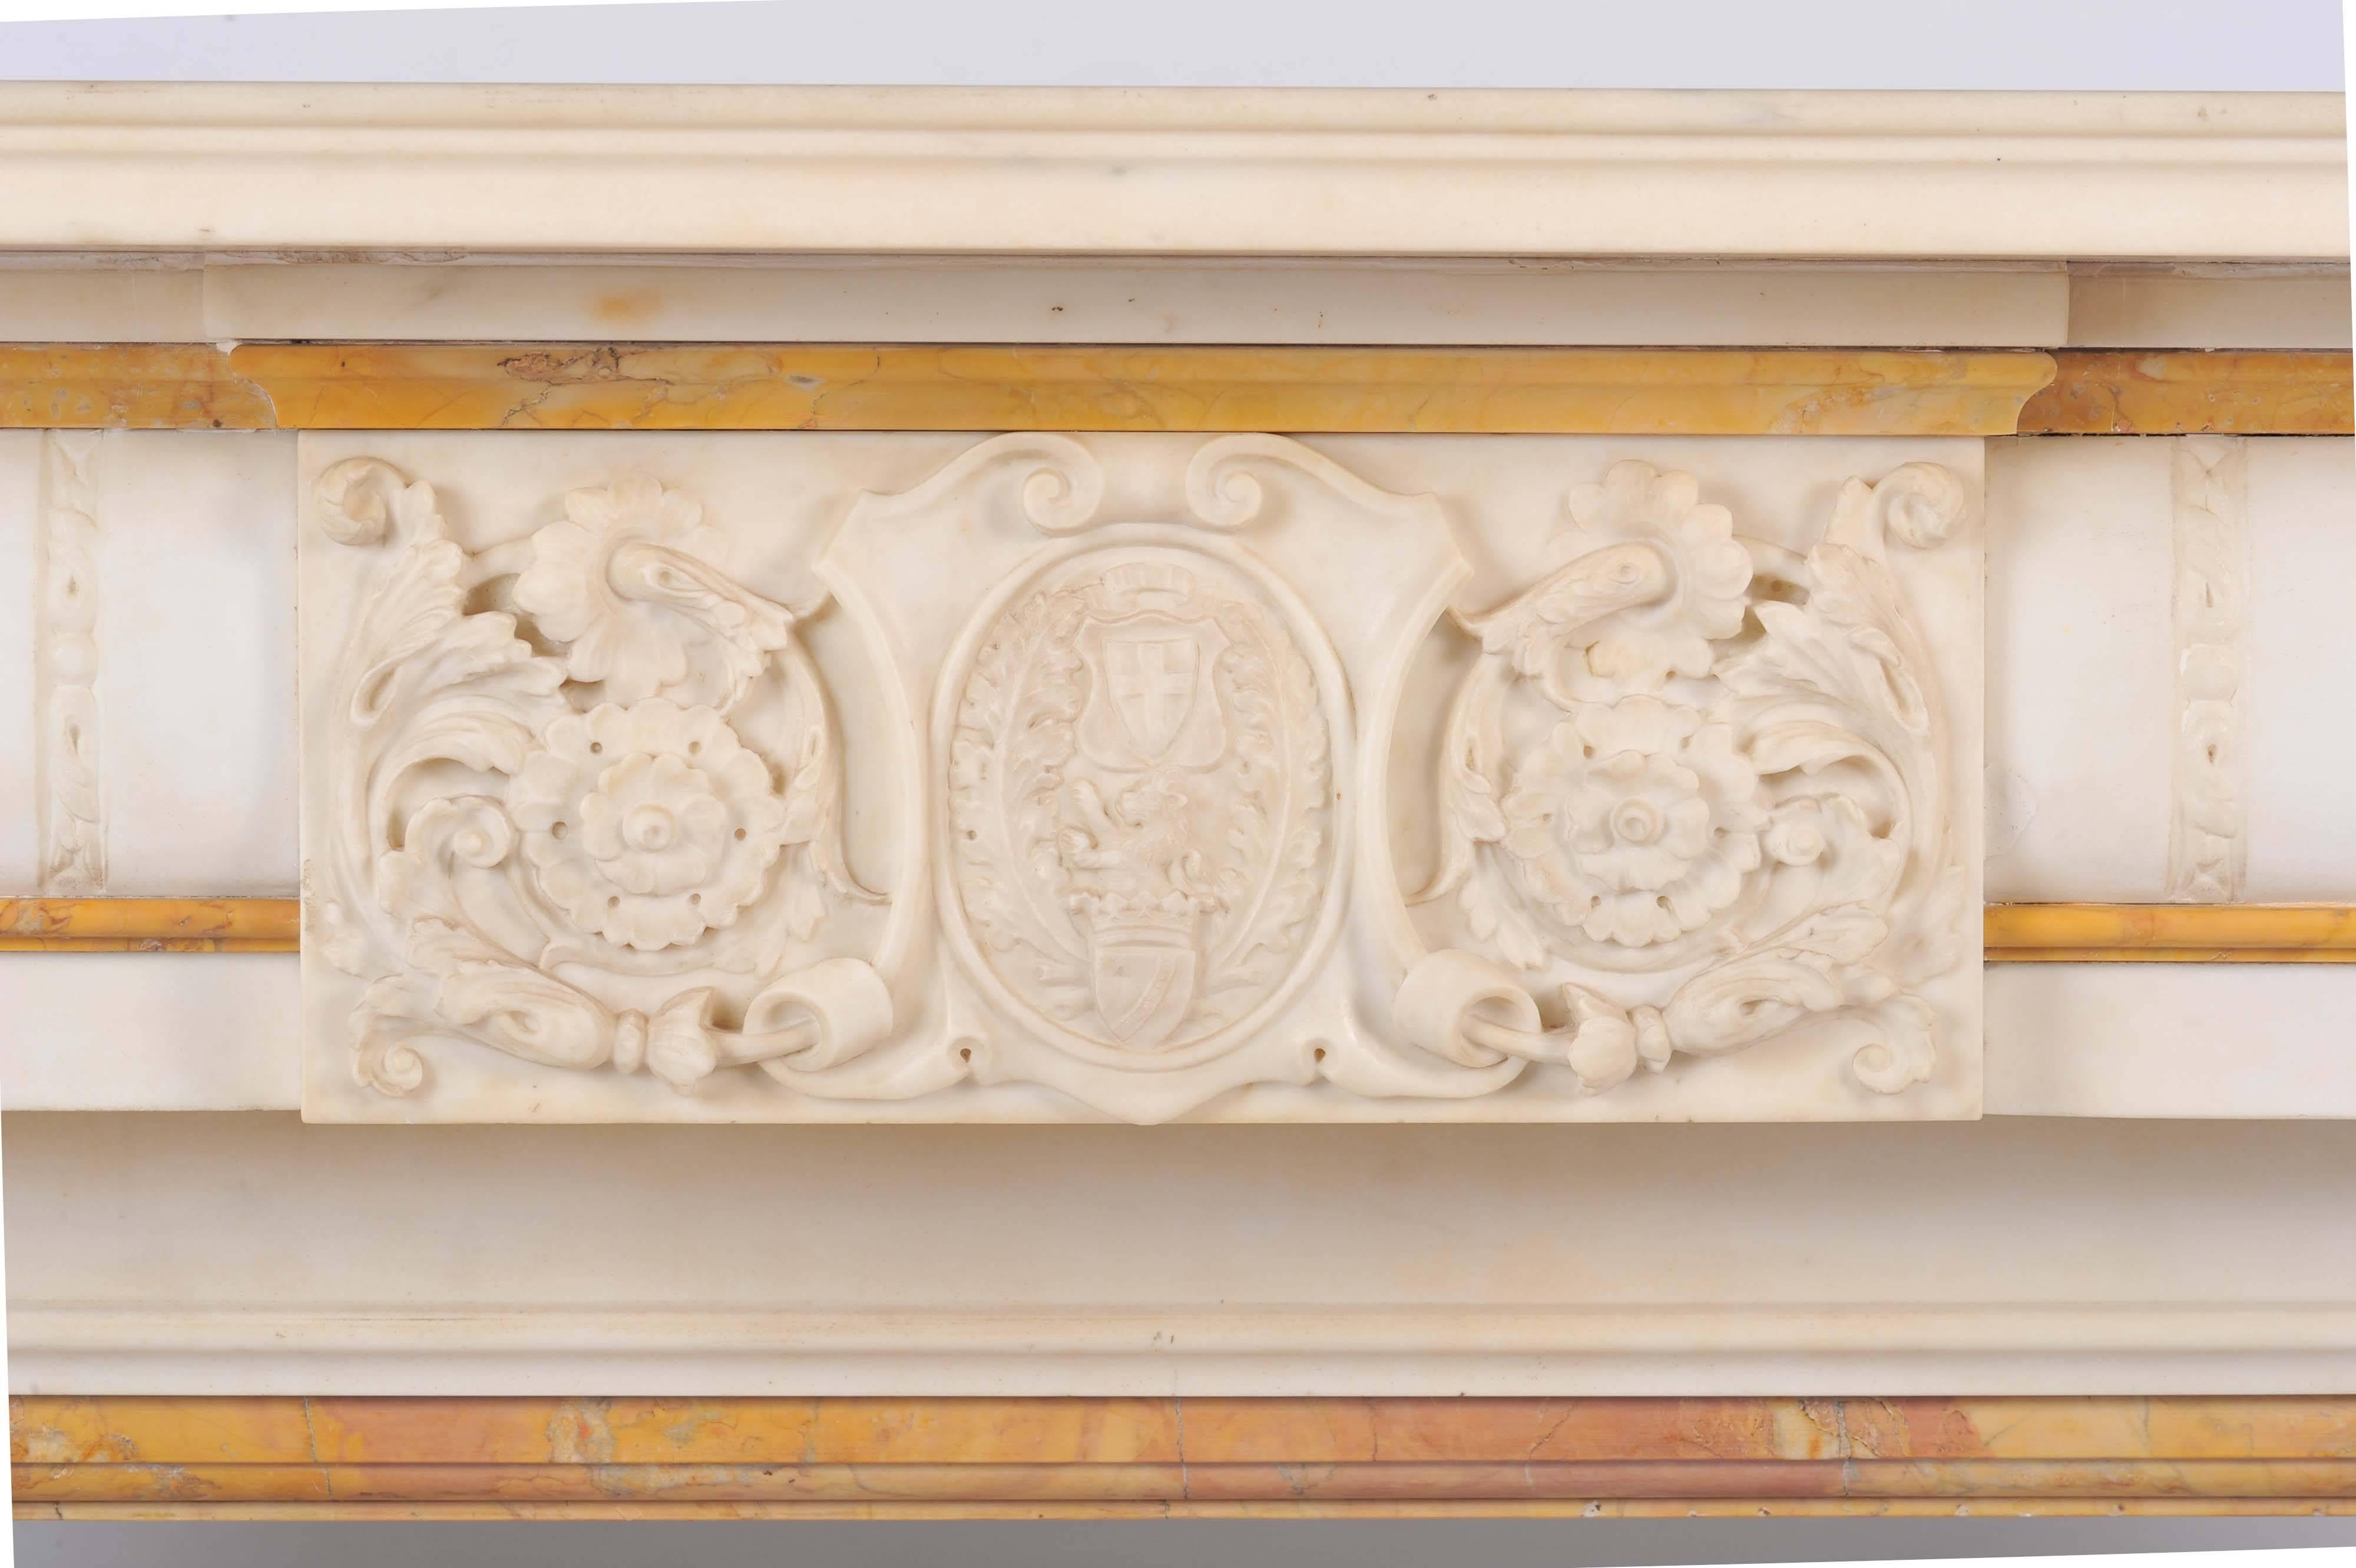 British Grand Antique English 19th Century Statuary and Sienna Marble Fireplace Surround For Sale